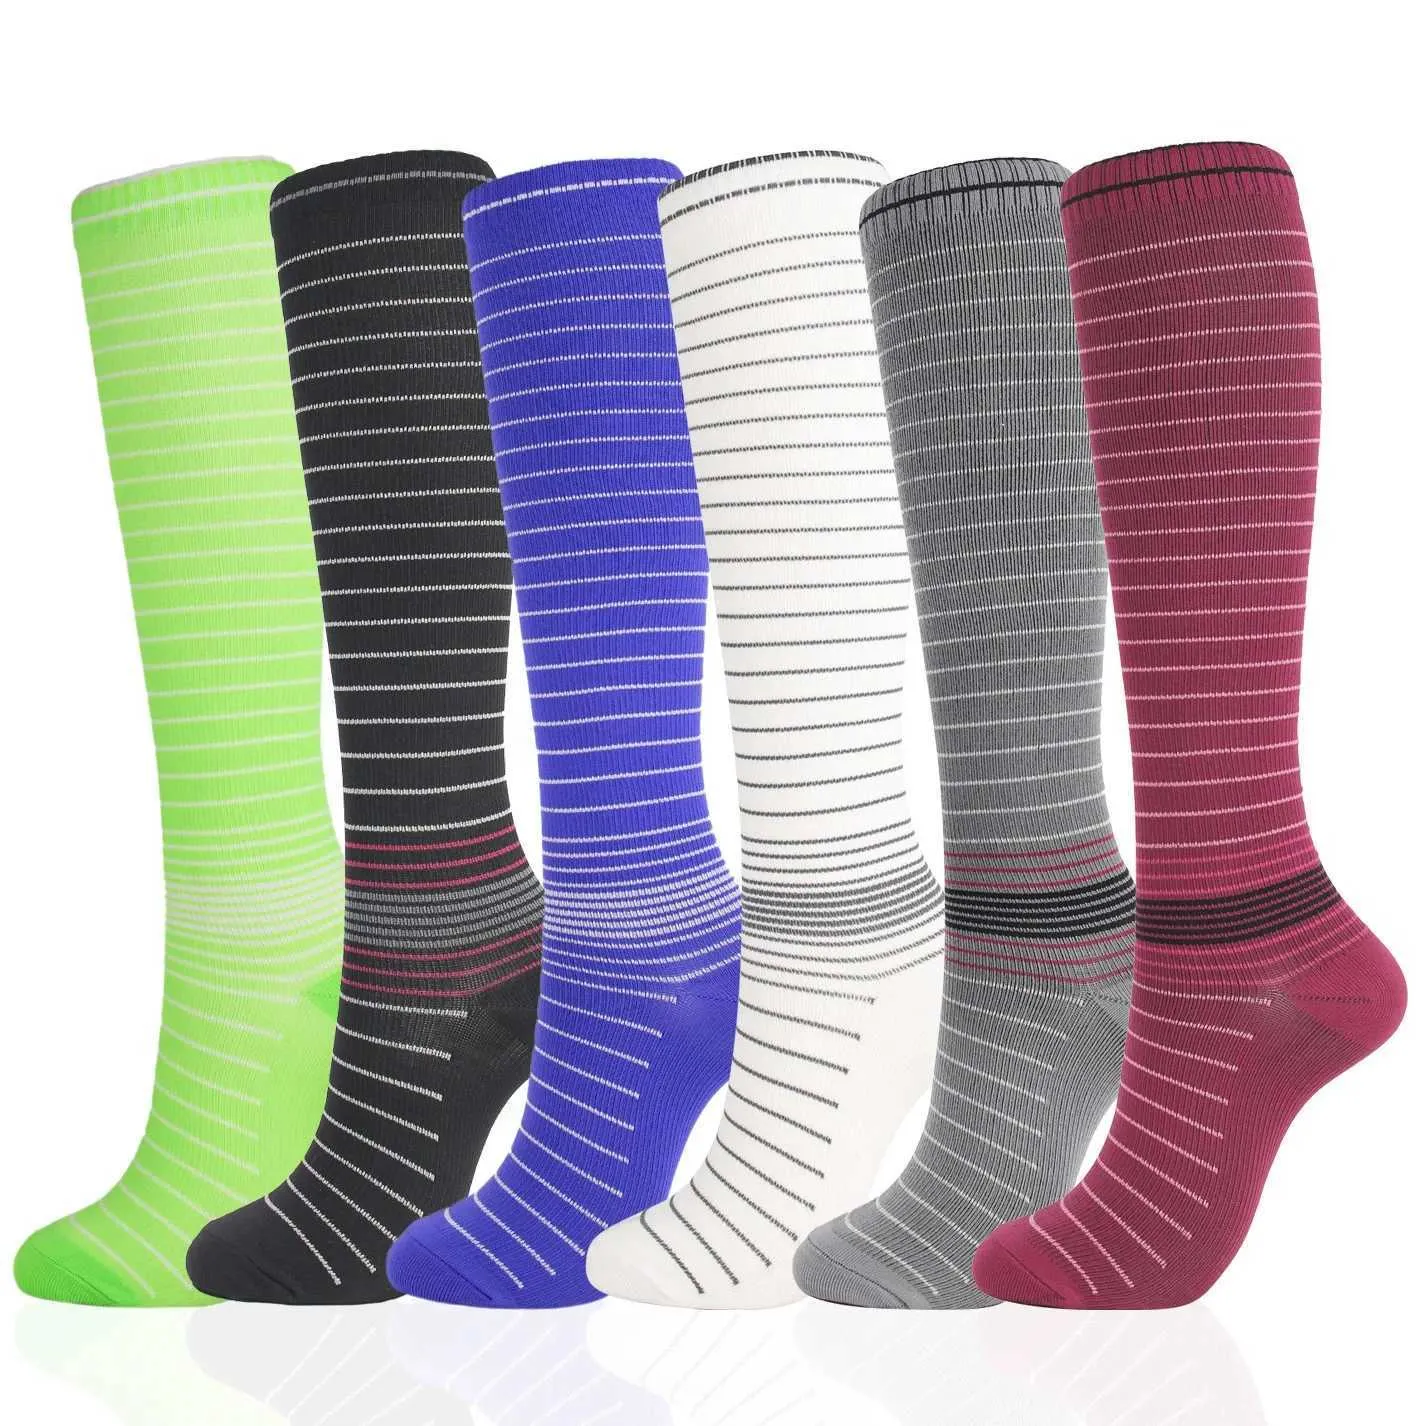 Chaussettes Hosiery Compression Chaussettes Running Football Cycling Gym Mens Nylon Sports Socks Medical Care Promotion de la circulation sanguine anti-fatigue Y240504